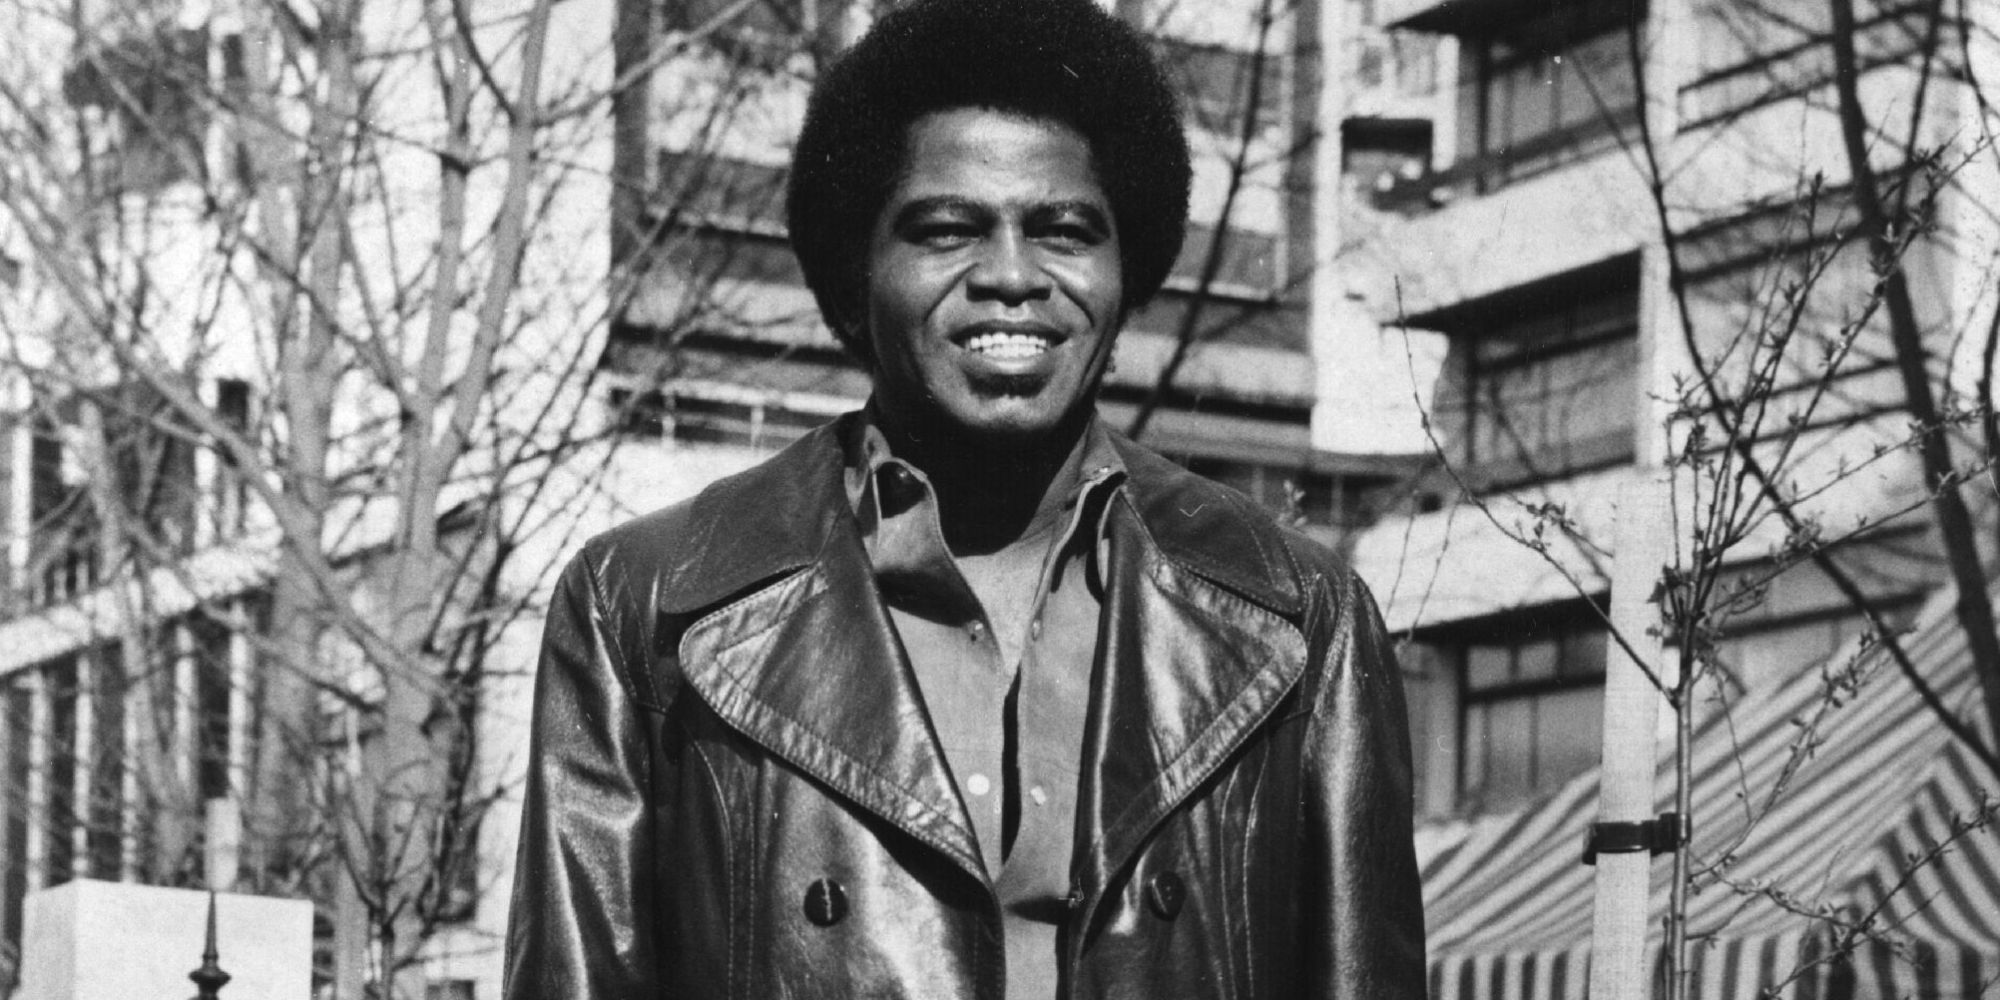 10th March 1971: Funk front man and self-professed godfather of soul, Mr James Brown. (Photo by Evening Standard/Getty Images)